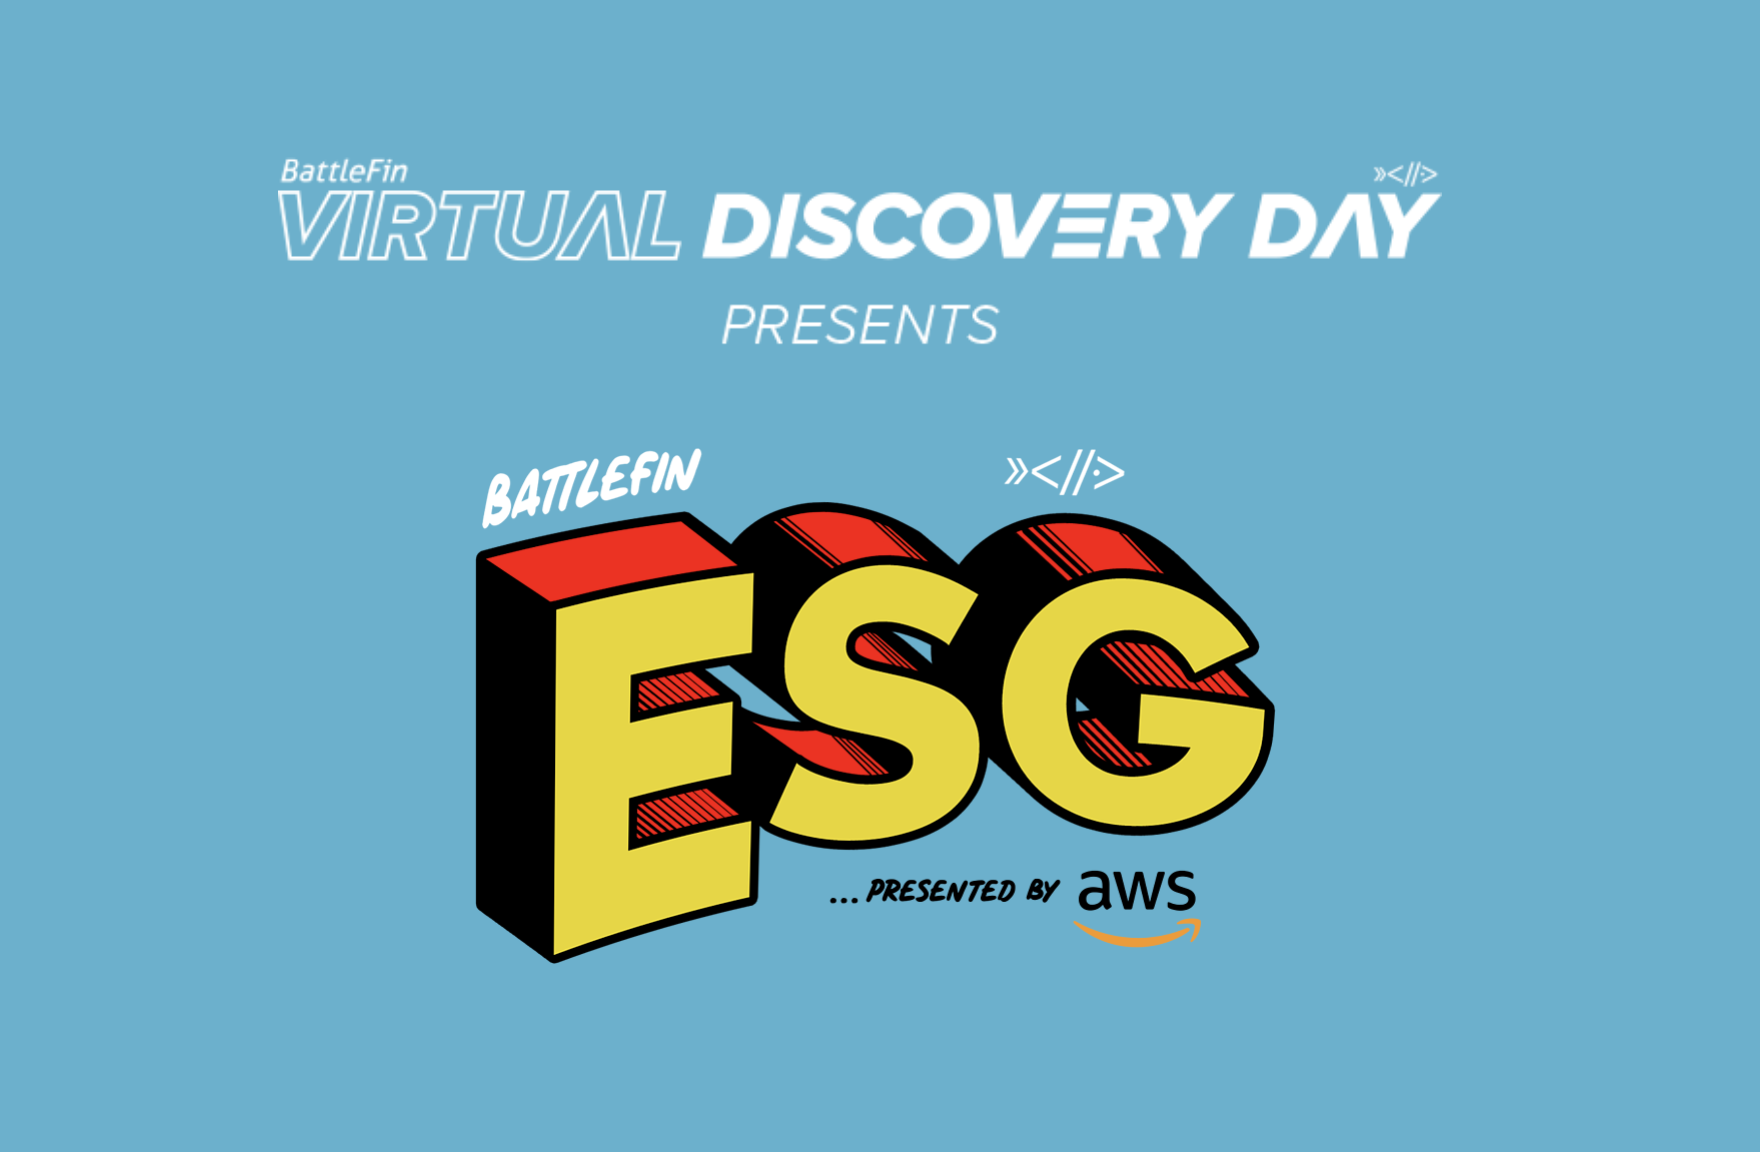 Virtual Discovery Day cover photo from Battlefin